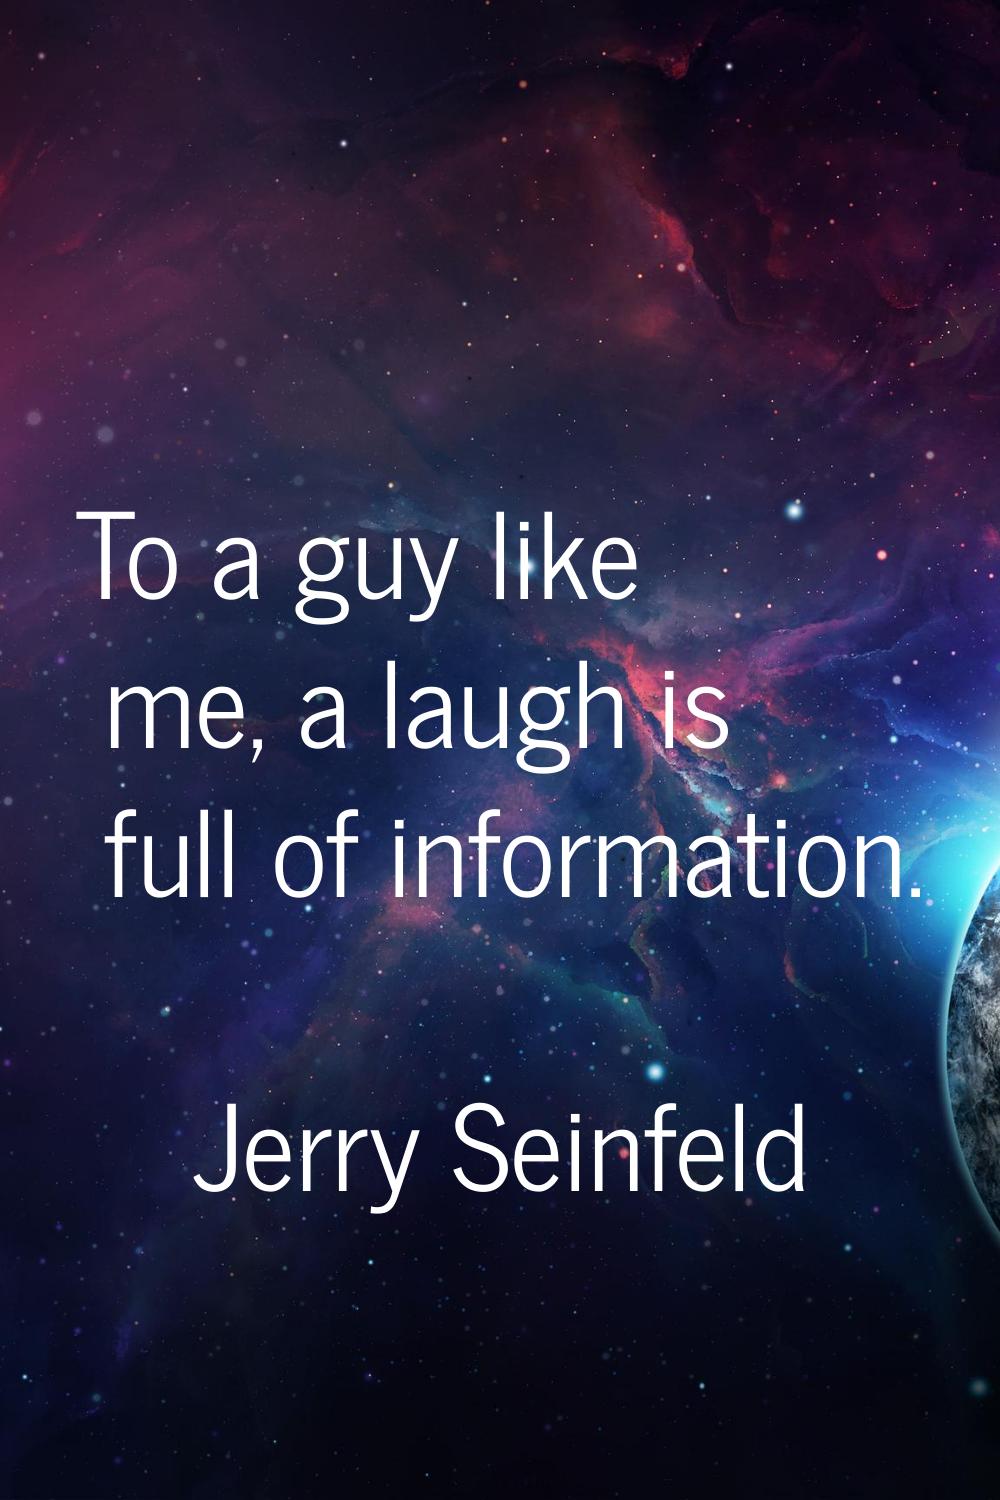 To a guy like me, a laugh is full of information.